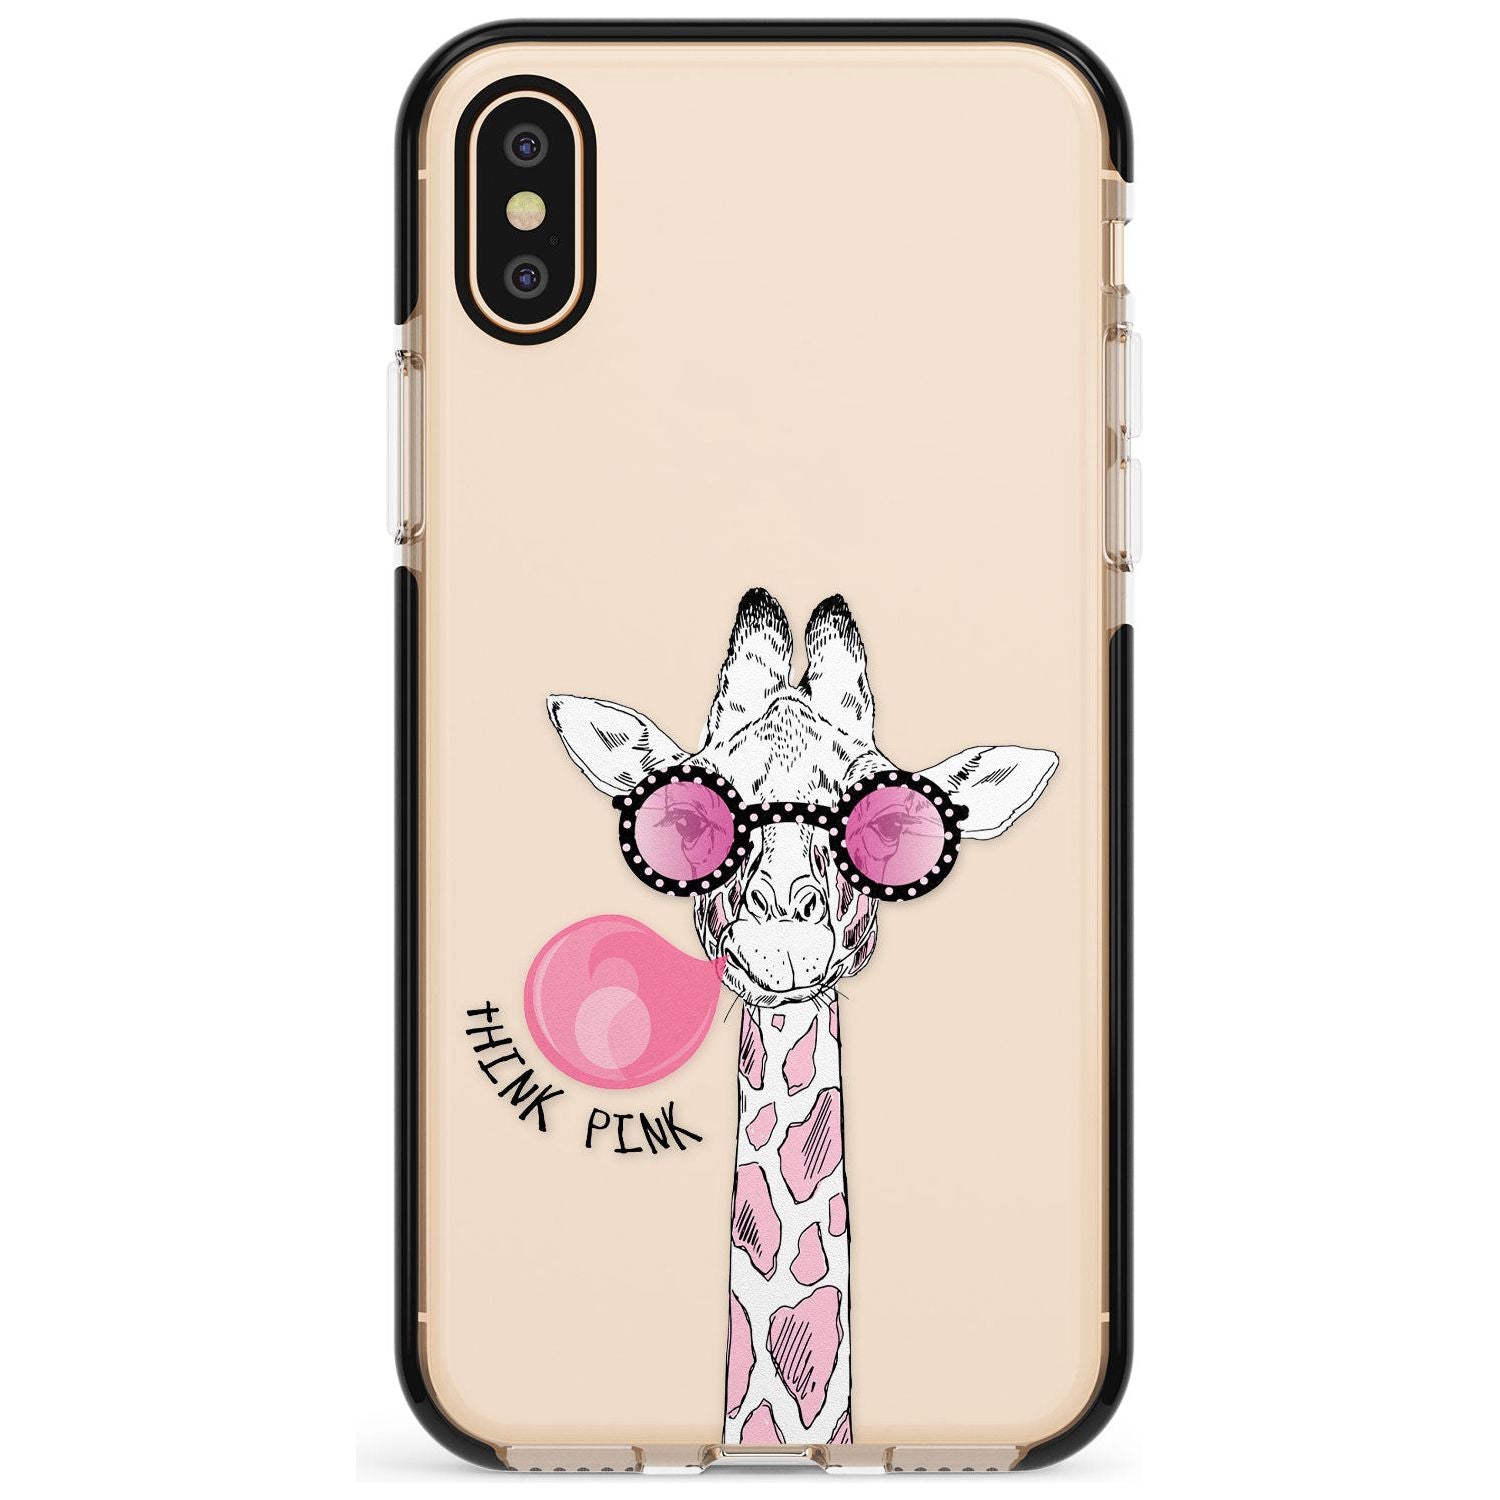 Think Pink Giraffe Black Impact Phone Case for iPhone X XS Max XR